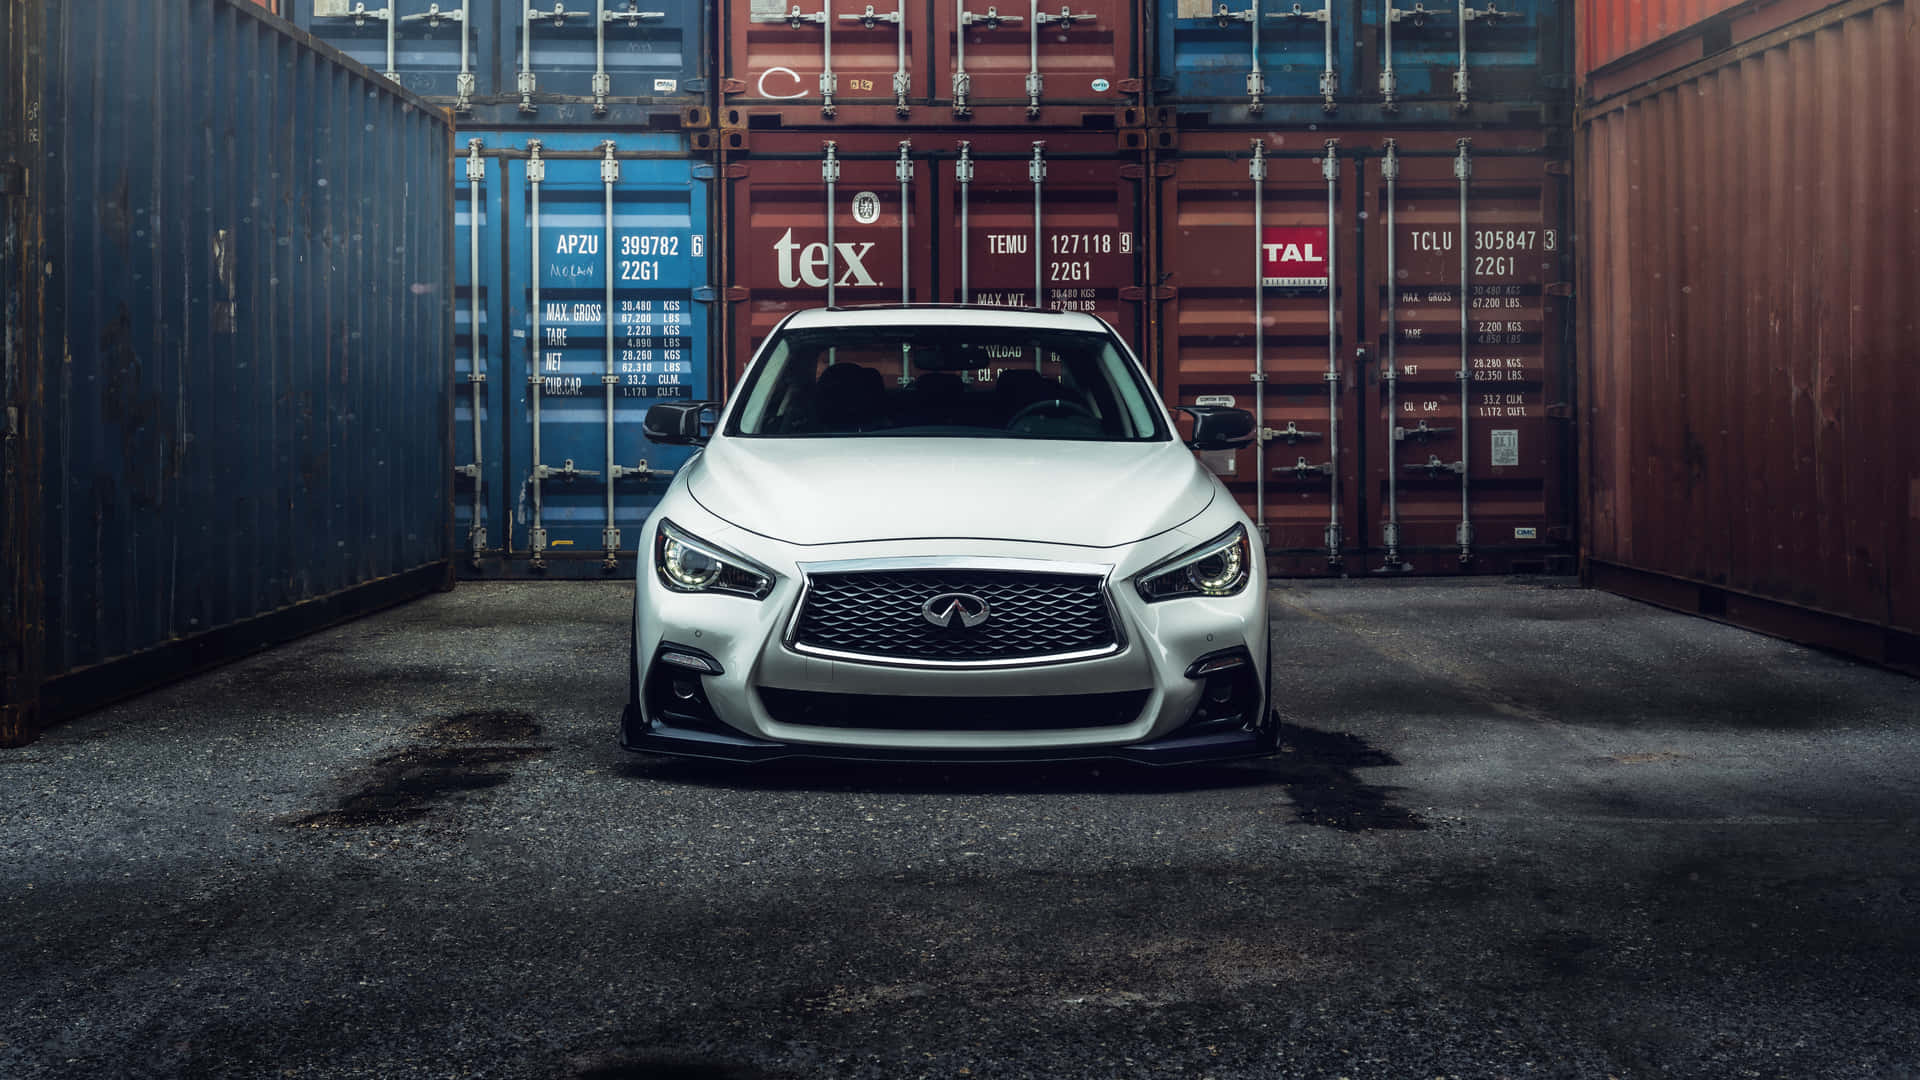 The Infiniti Qx50 Parked In A Container Wallpaper